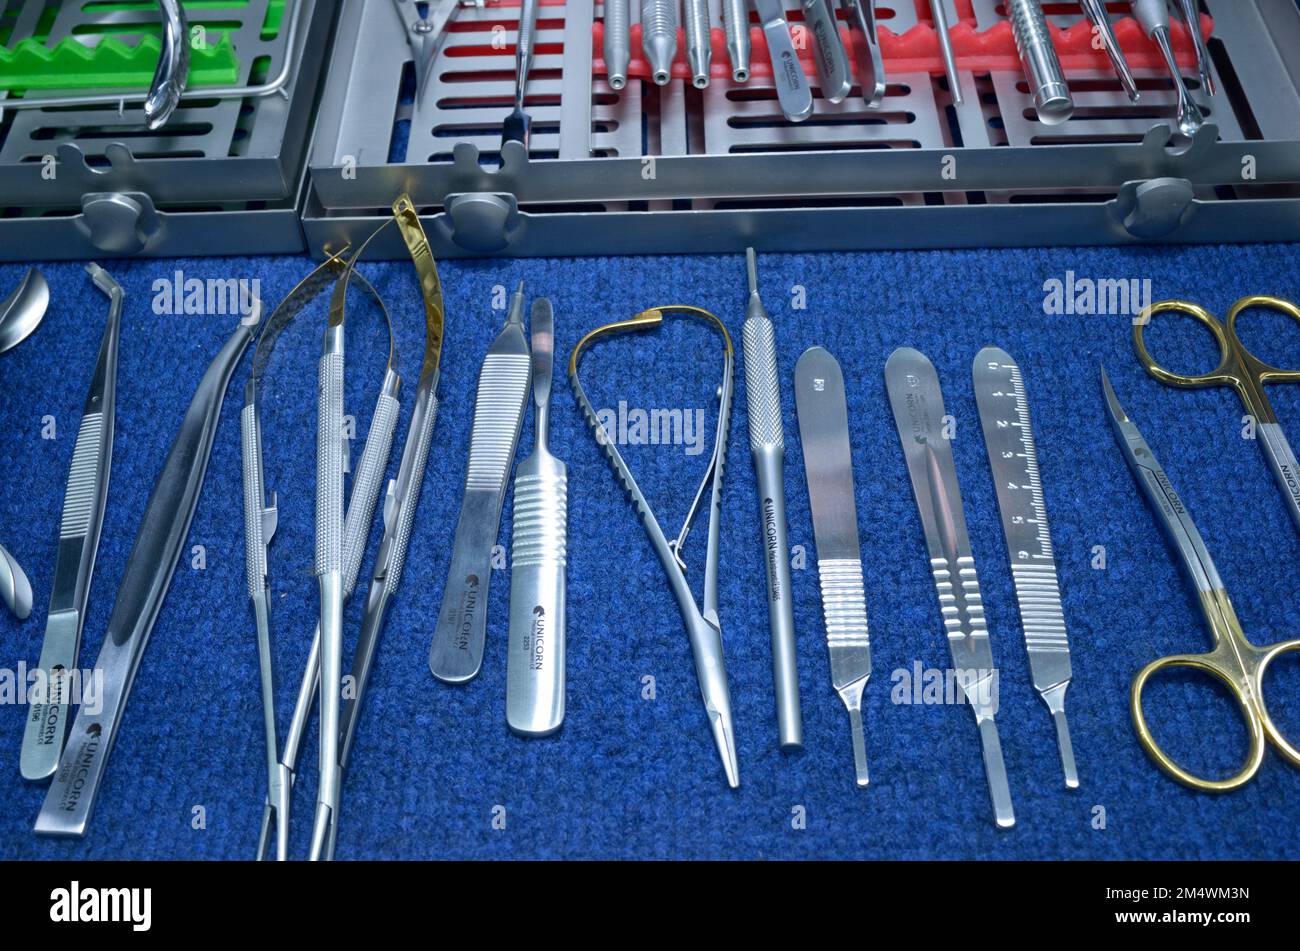 Dental surgical instruments, made by Unicorn, placed on a stand